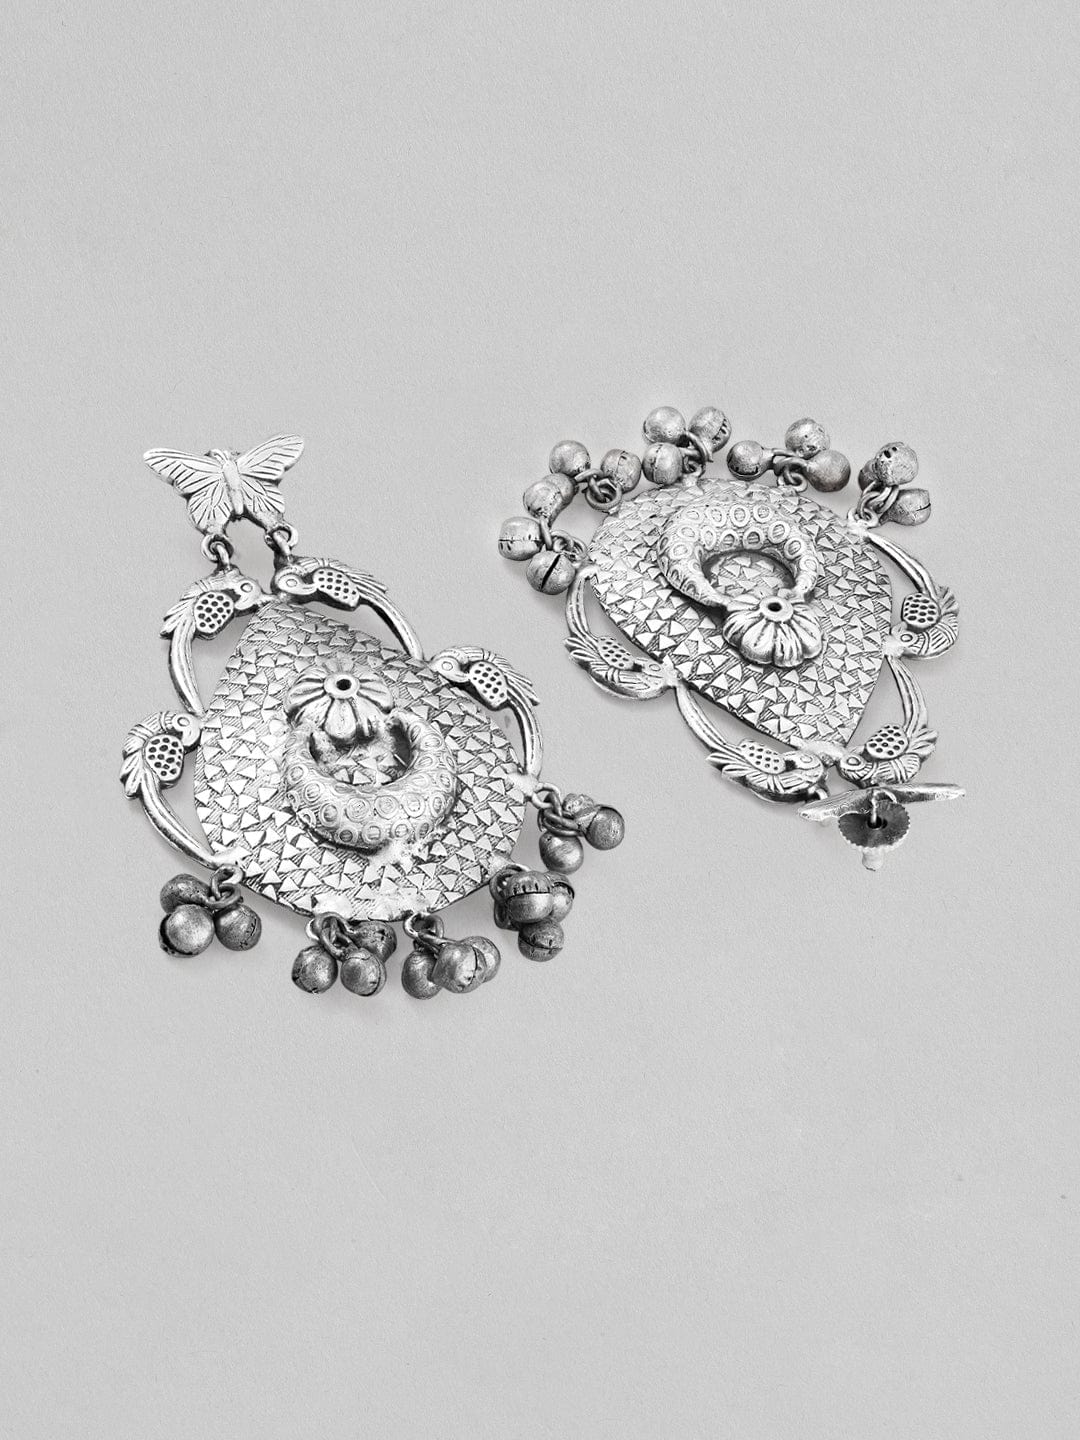 Rubans Silver Oxidised Drop Earrings With Butterfly Design And Silver Beads Earrings